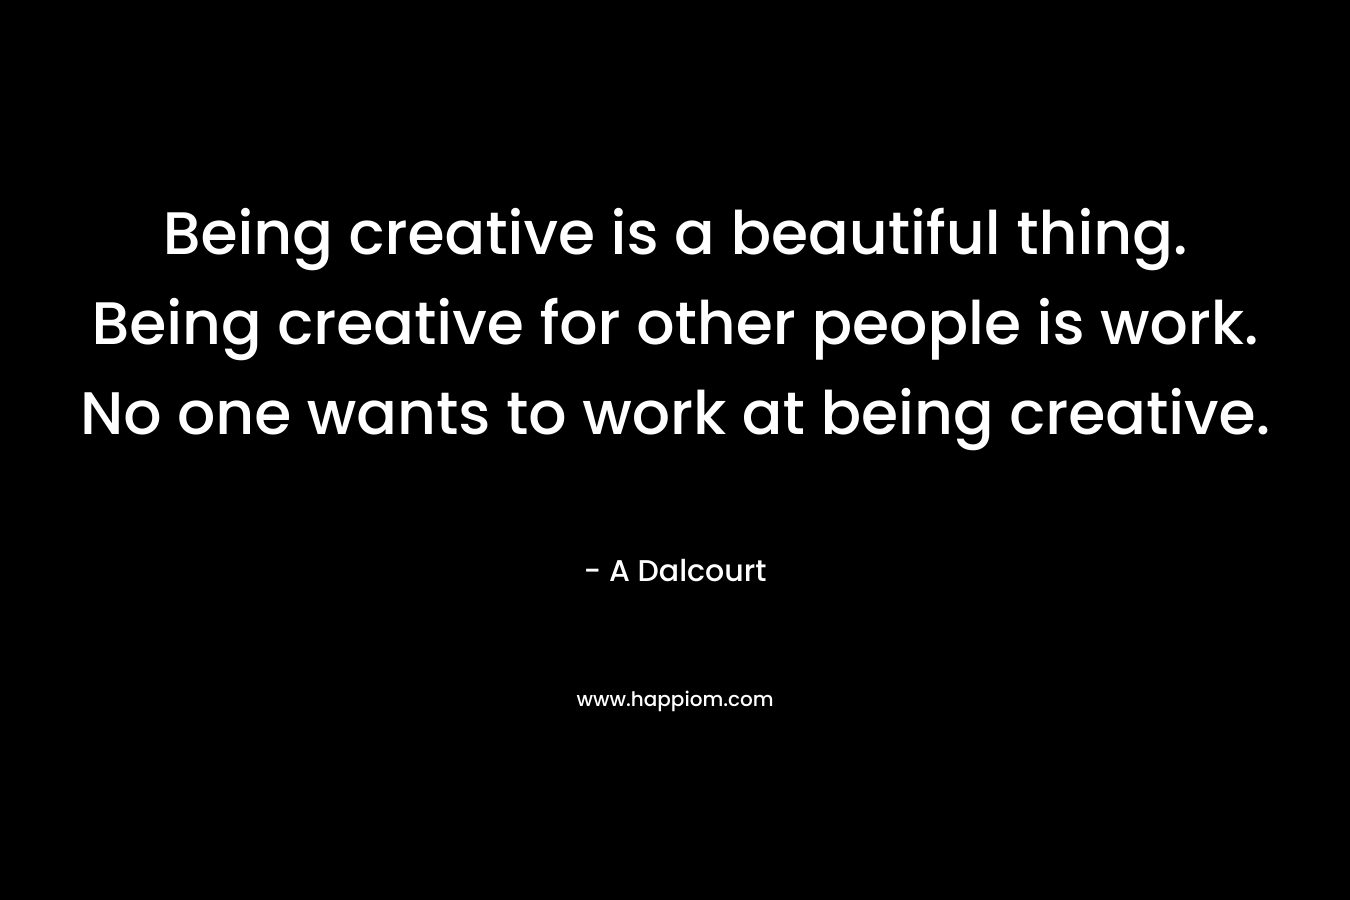 Being creative is a beautiful thing. Being creative for other people is work. No one wants to work at being creative.